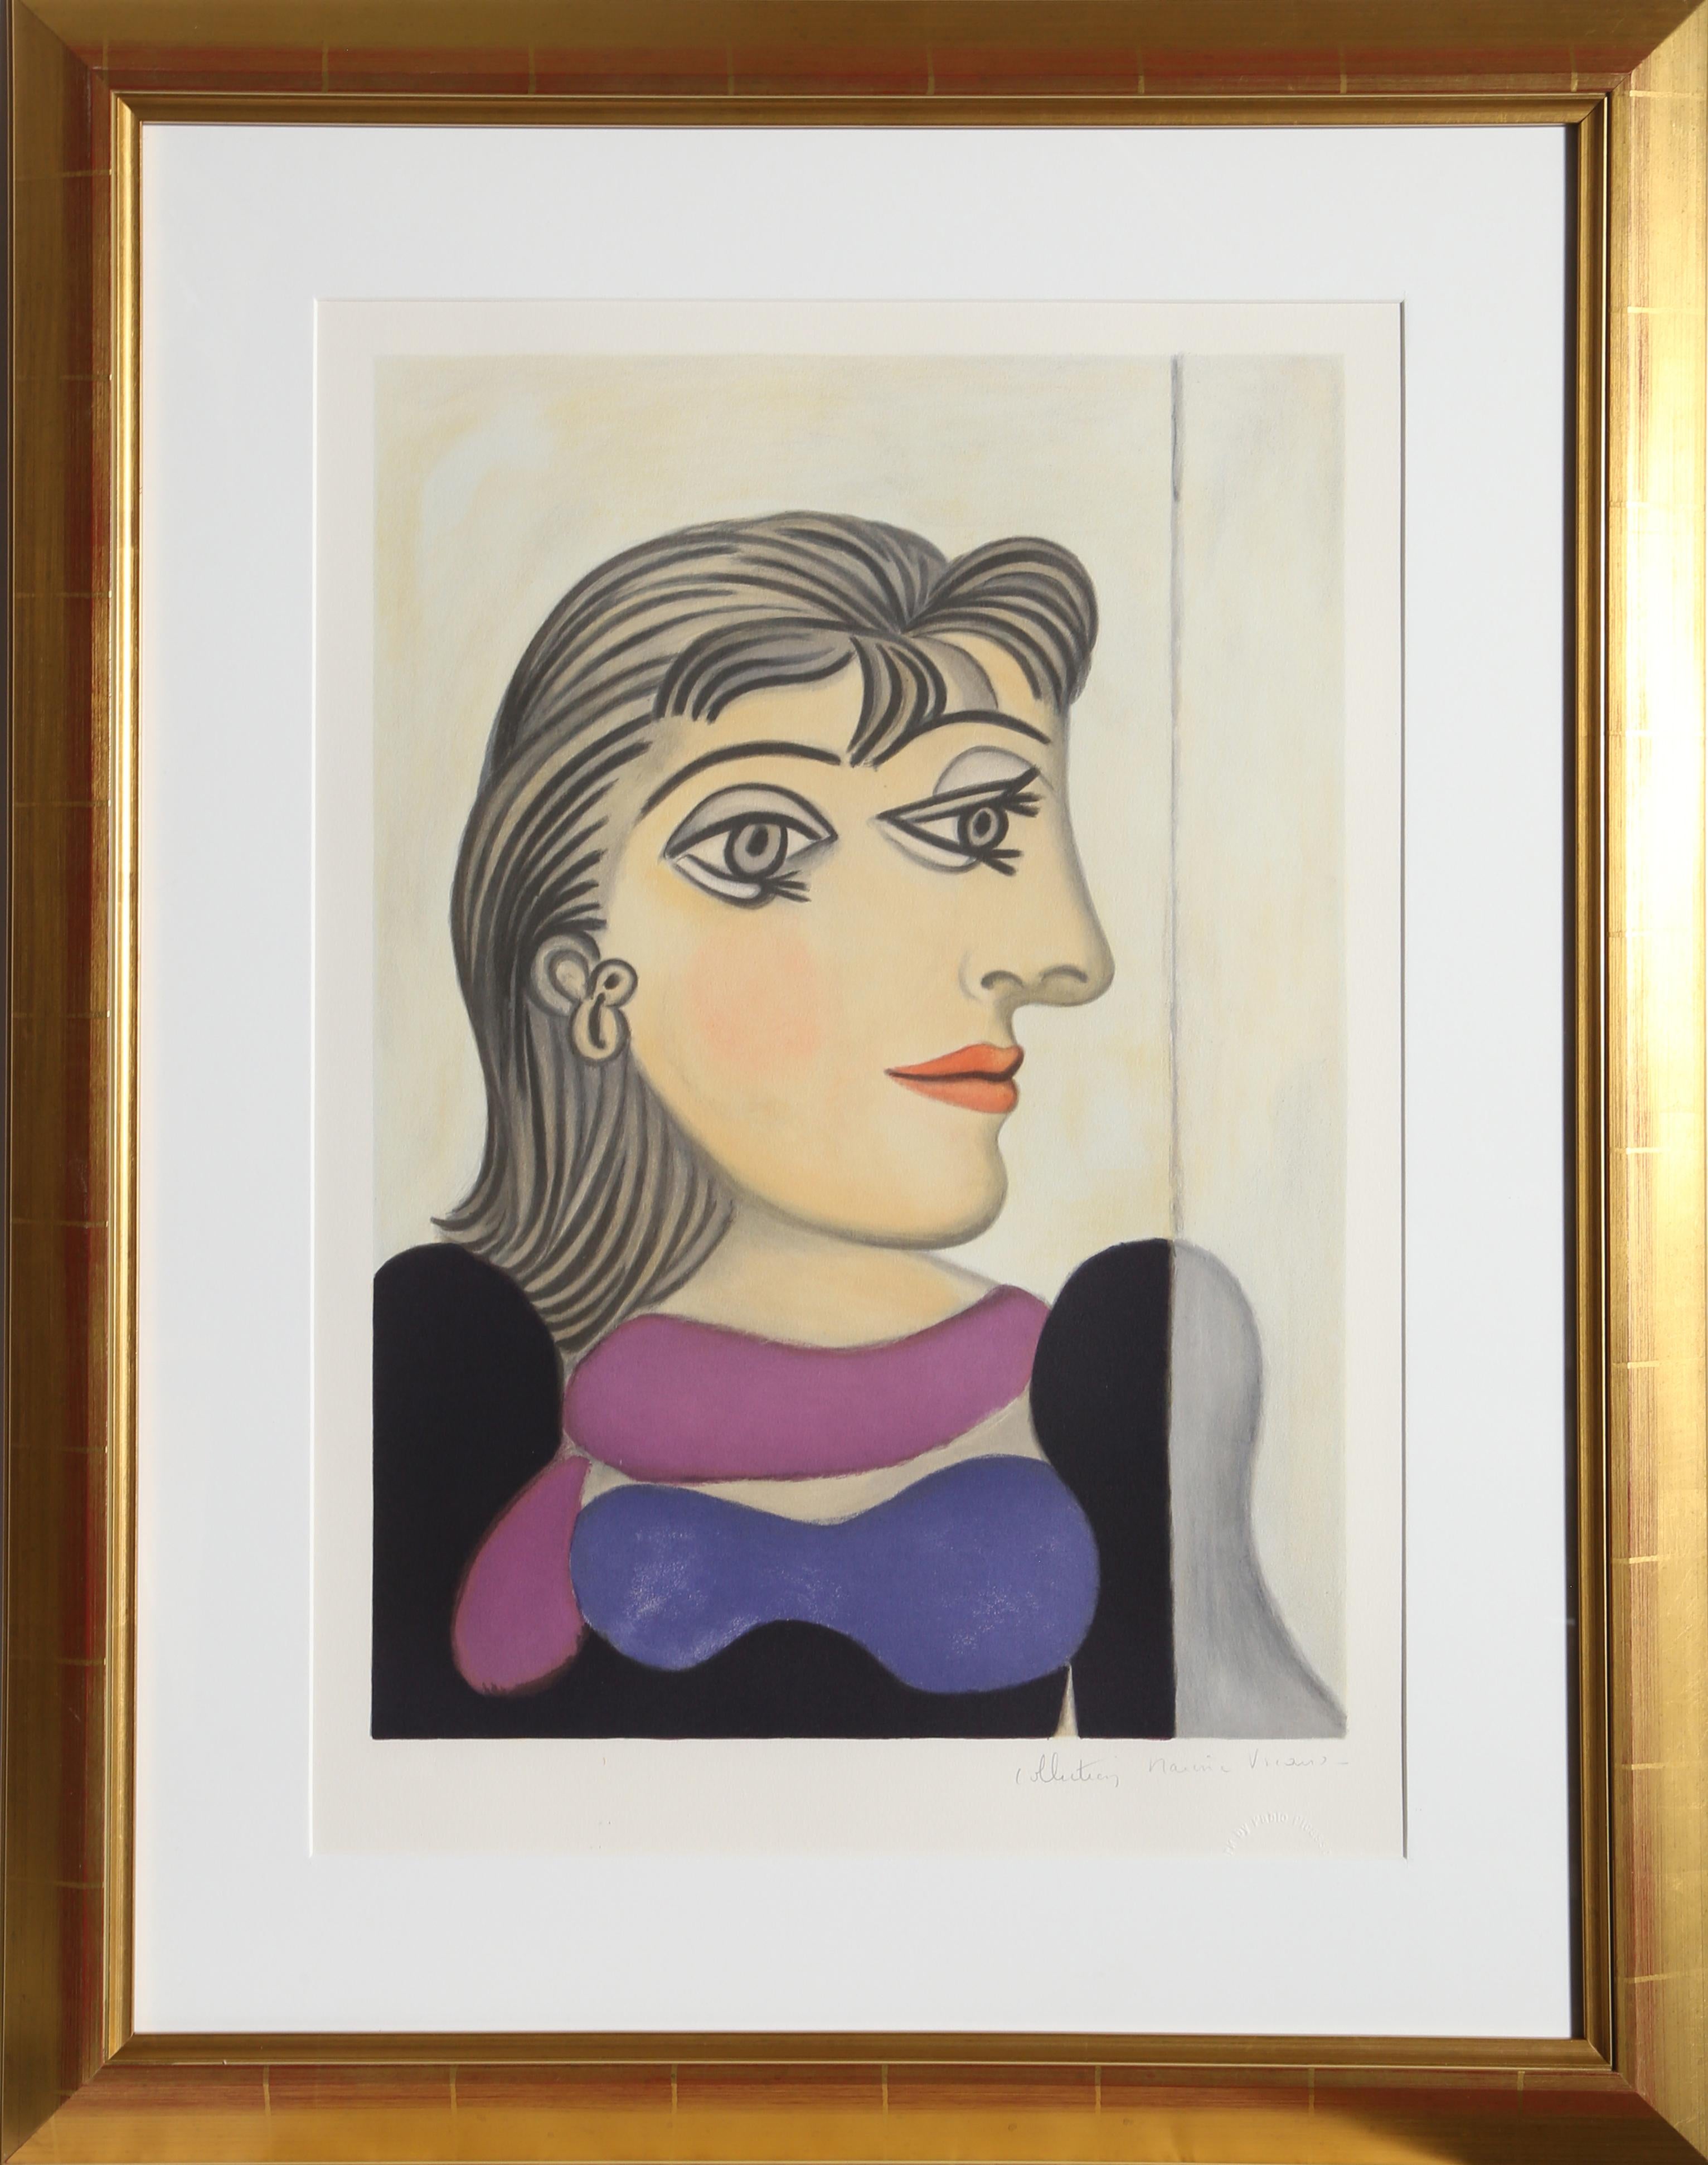 A lithograph from the Marina Picasso Estate Collection after the Pablo Picasso painting "Buste de Femme Au Foulard Mauve". The original painting was completed in 1937. In the 1970's after Picasso's death, Marina Picasso, his granddaughter,